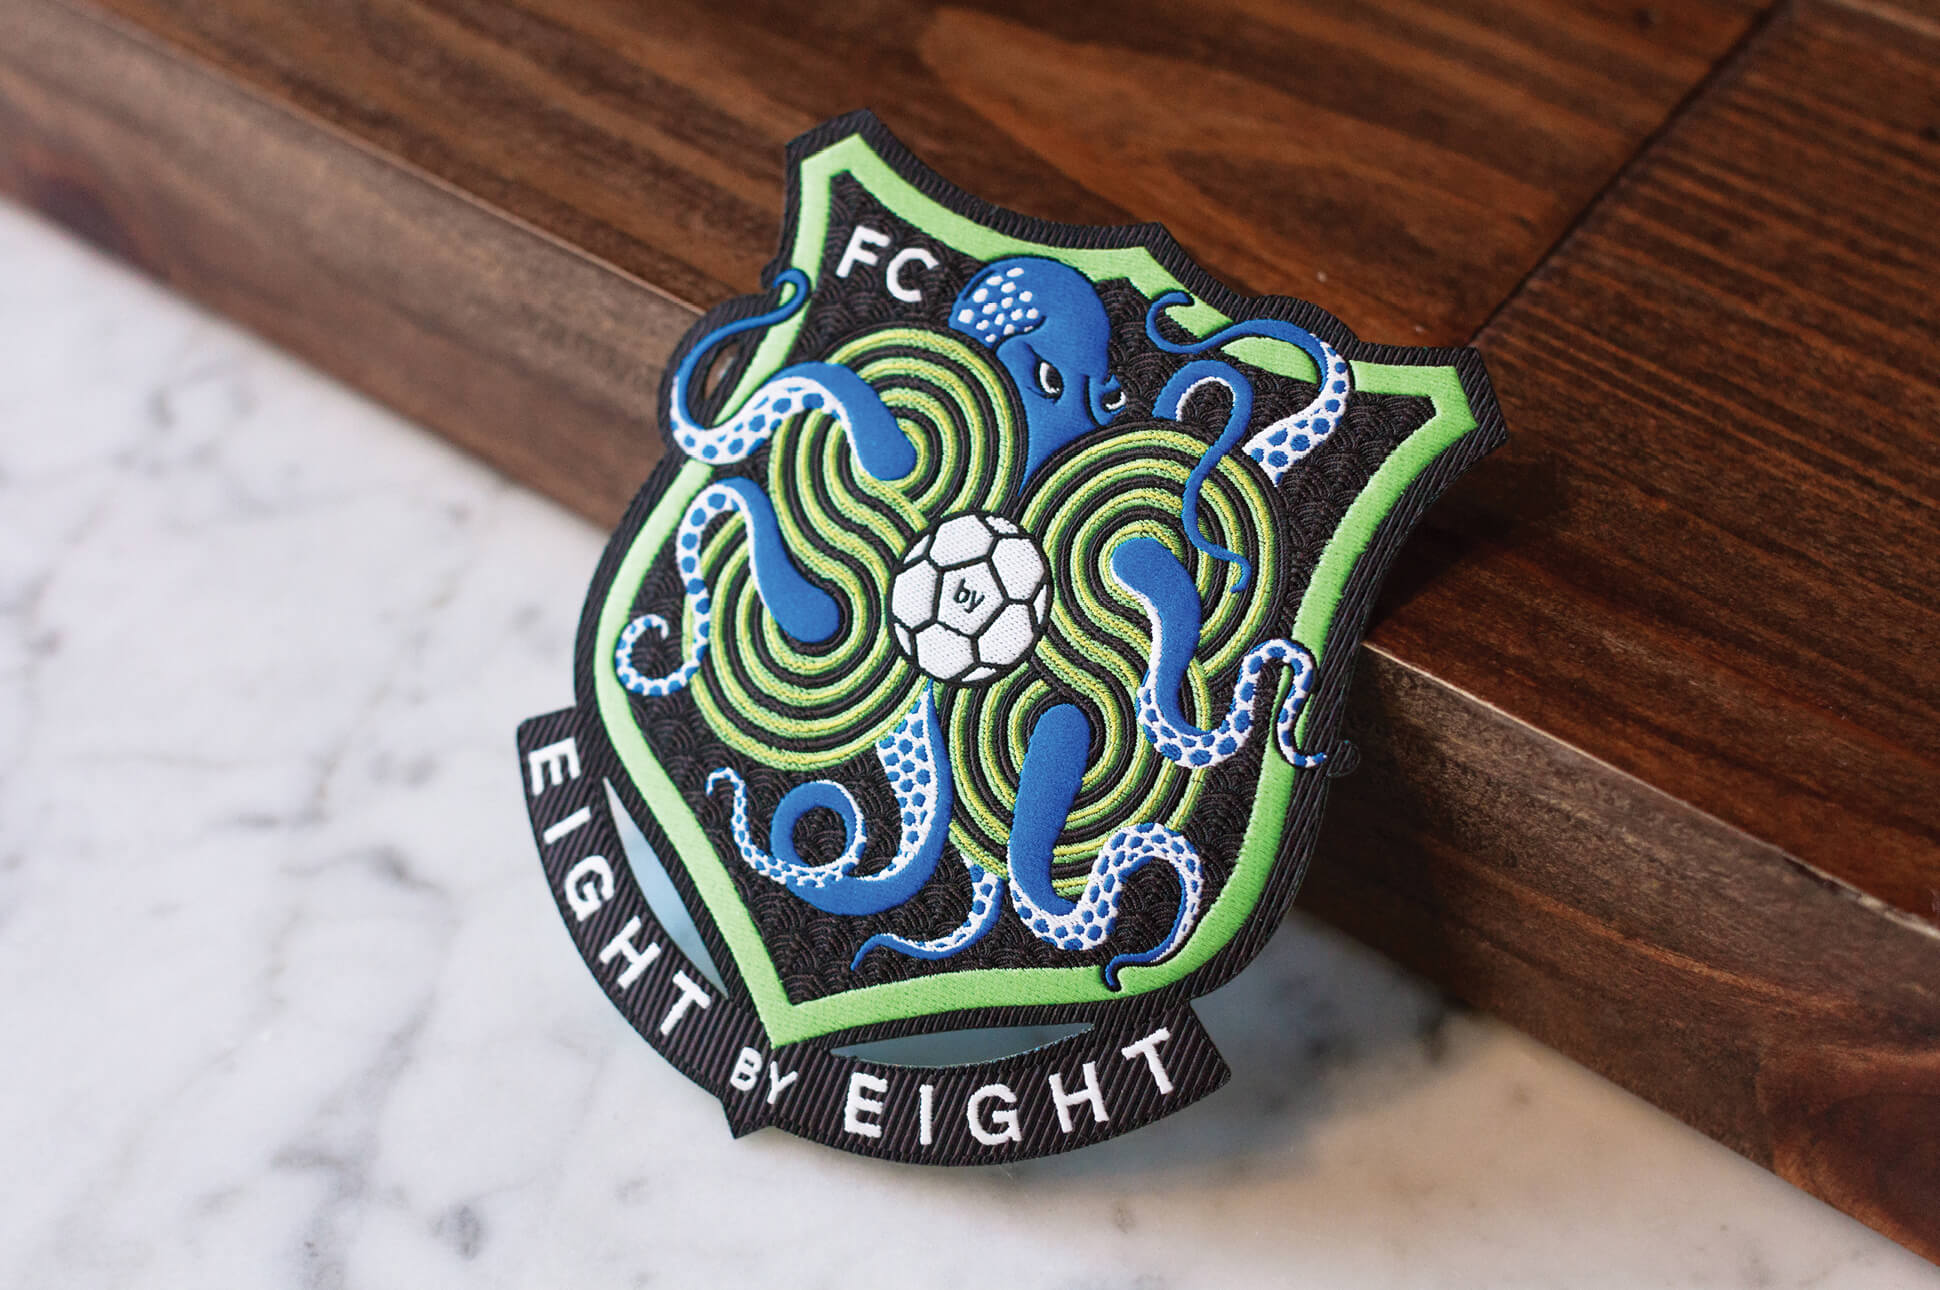 Eight by Eight FC Badge (3-pack)